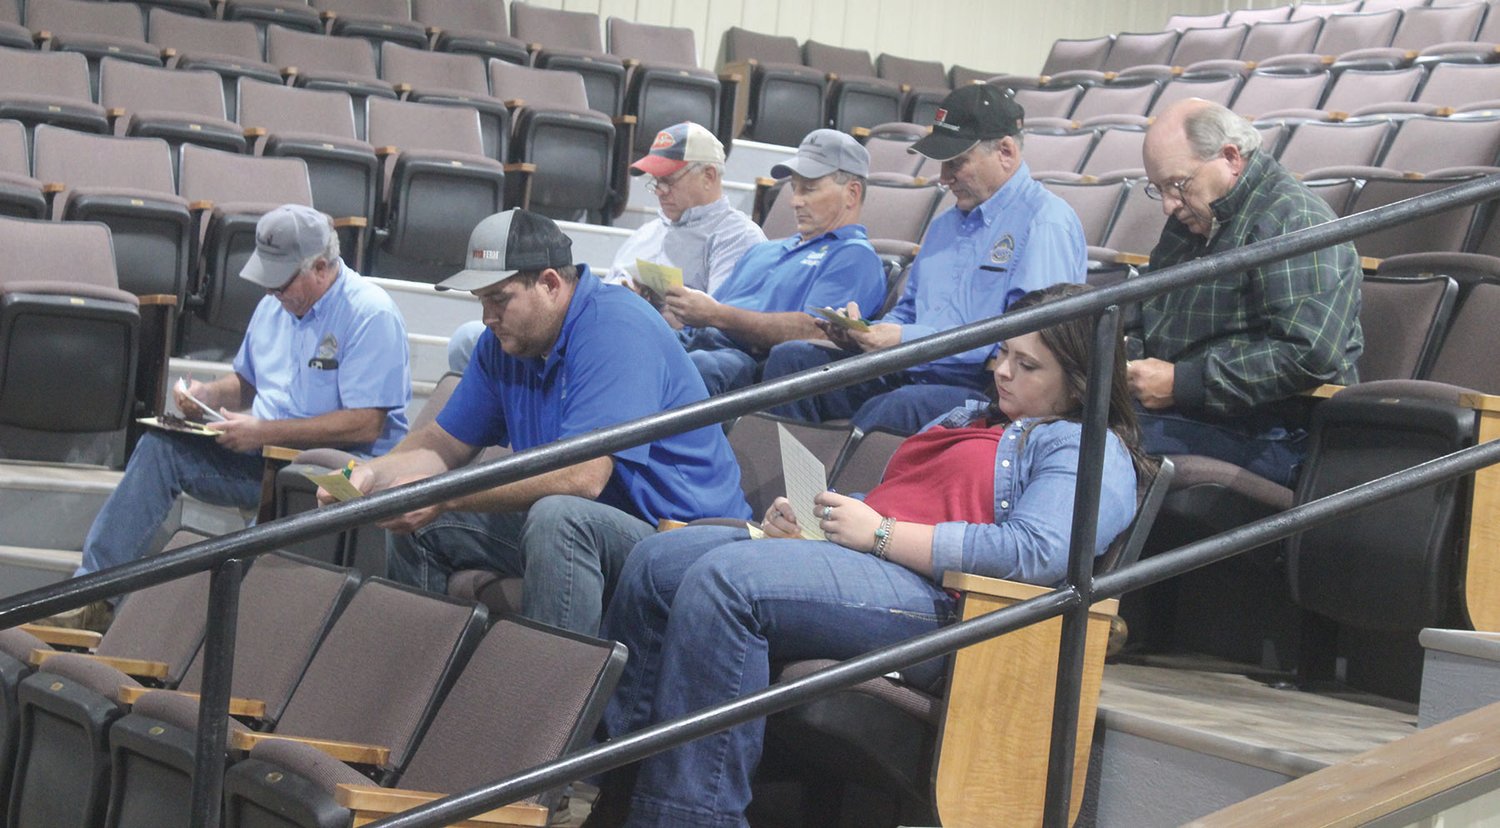 Several USDA officials during a semi-annual meeting held at the Wright County Livestock Auction locatoin.